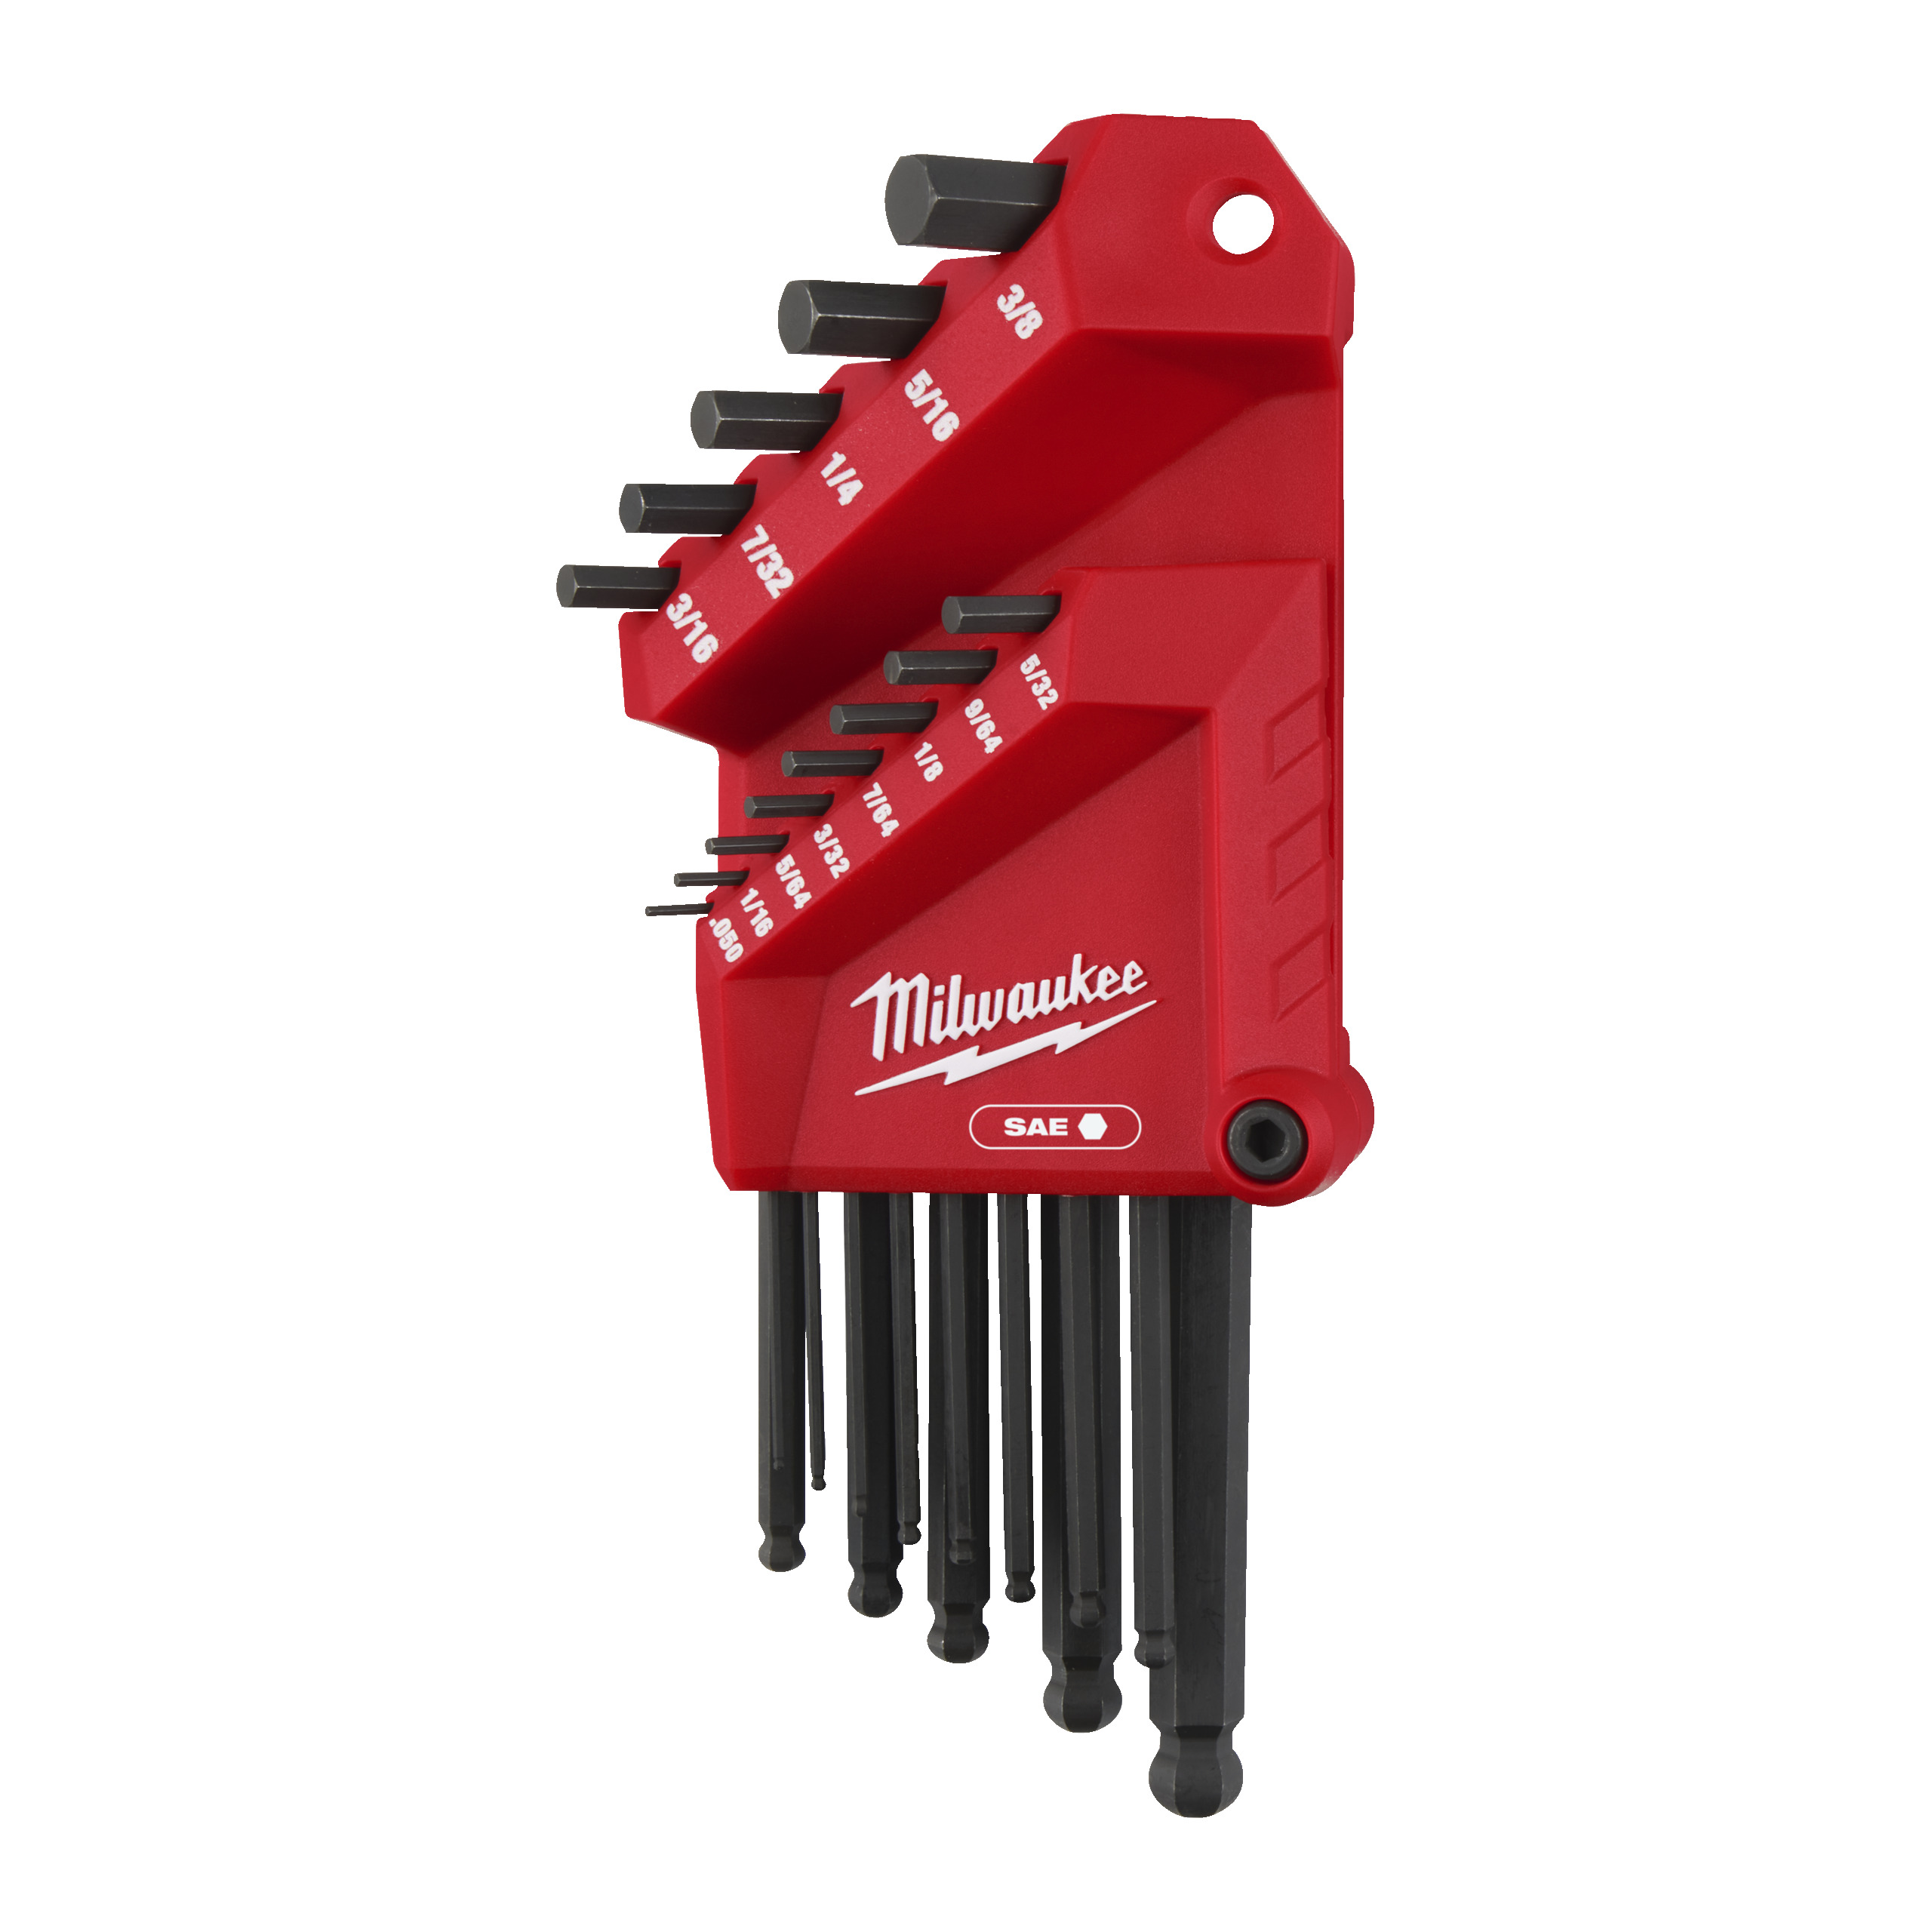 Milwaukee 13 pc Imperial L-Style with Ball End Hex Key Set 4932493615